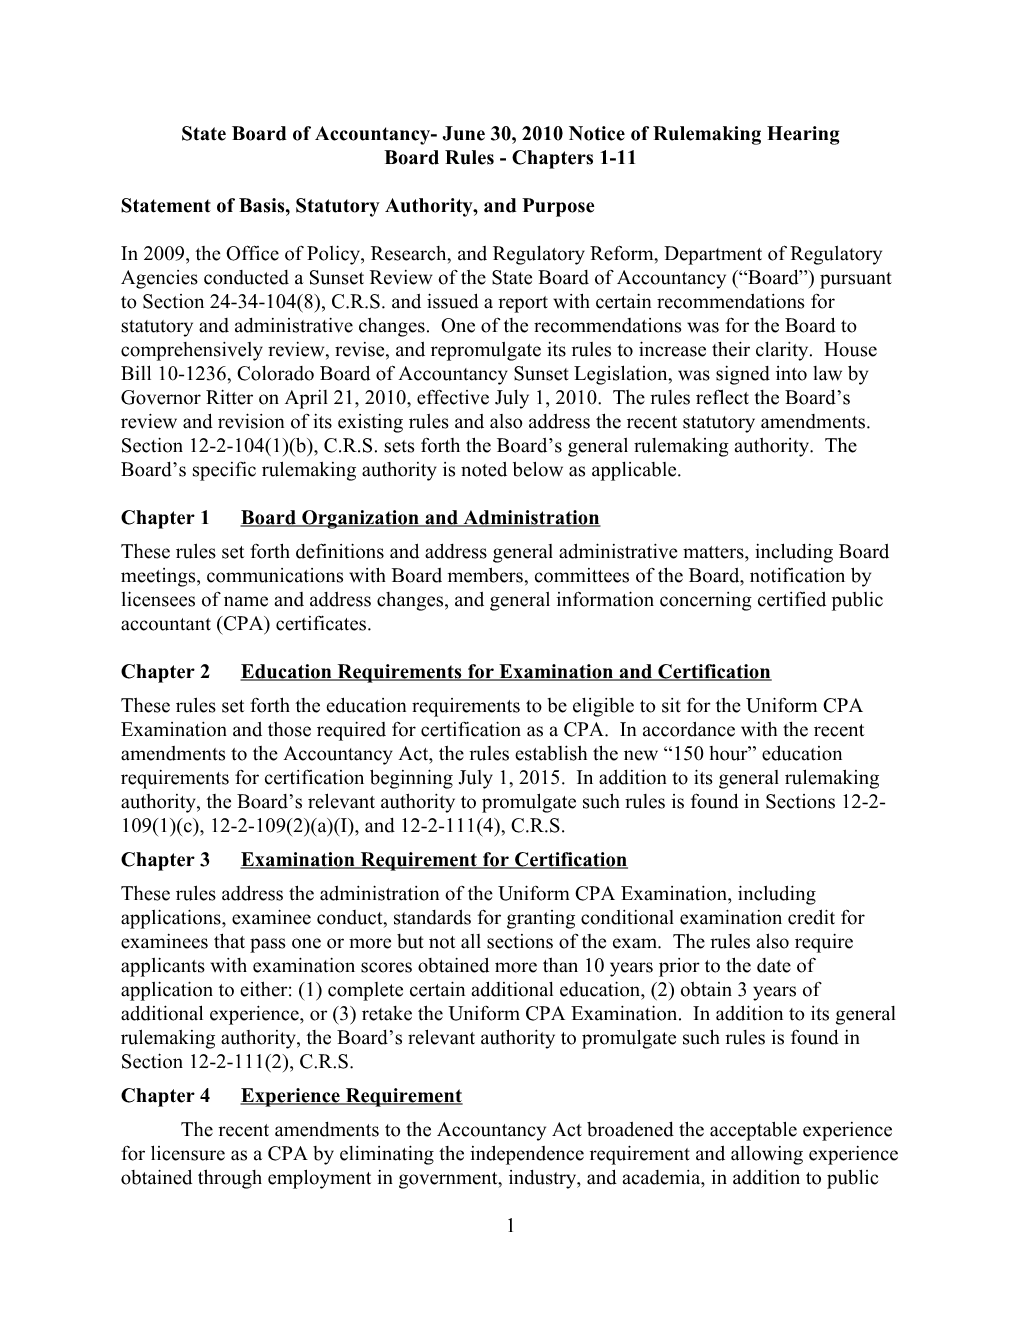 State Board of Accountancy- June 30, 2010 Notice of Rulemaking Hearing